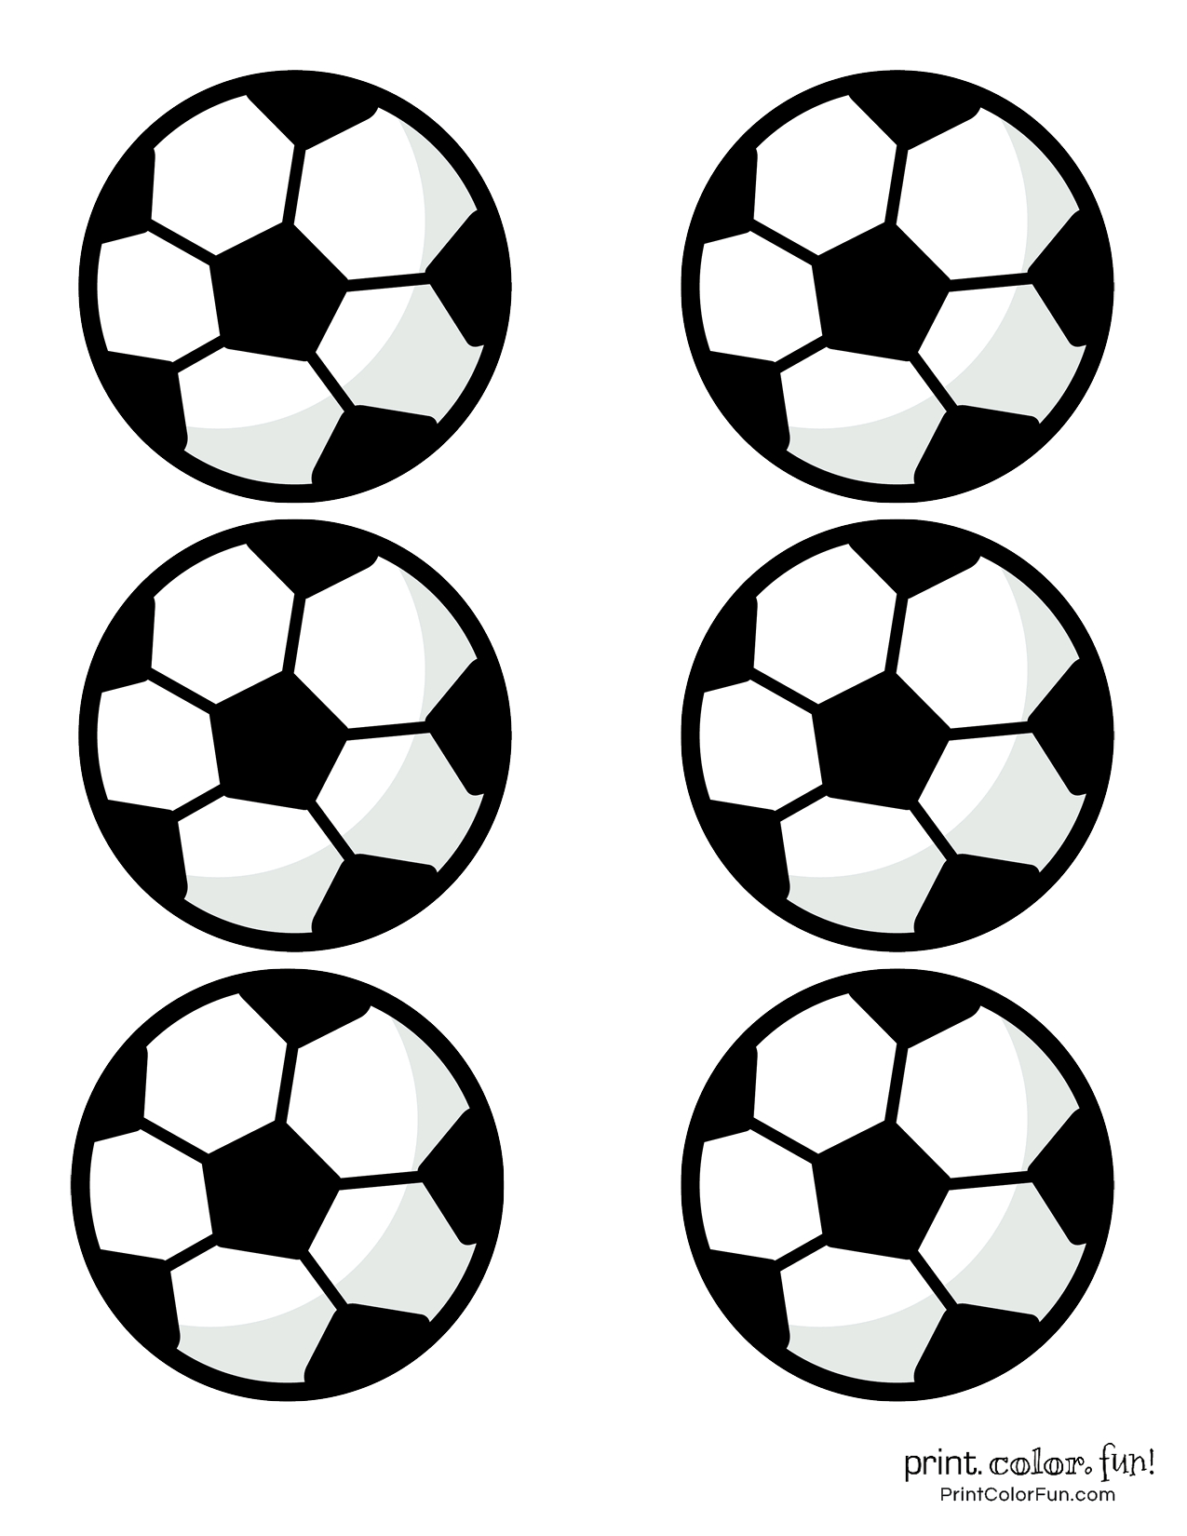 Printable Soccer Ball Template Calep midnightpig co With Regard To Soccer Thank You Card